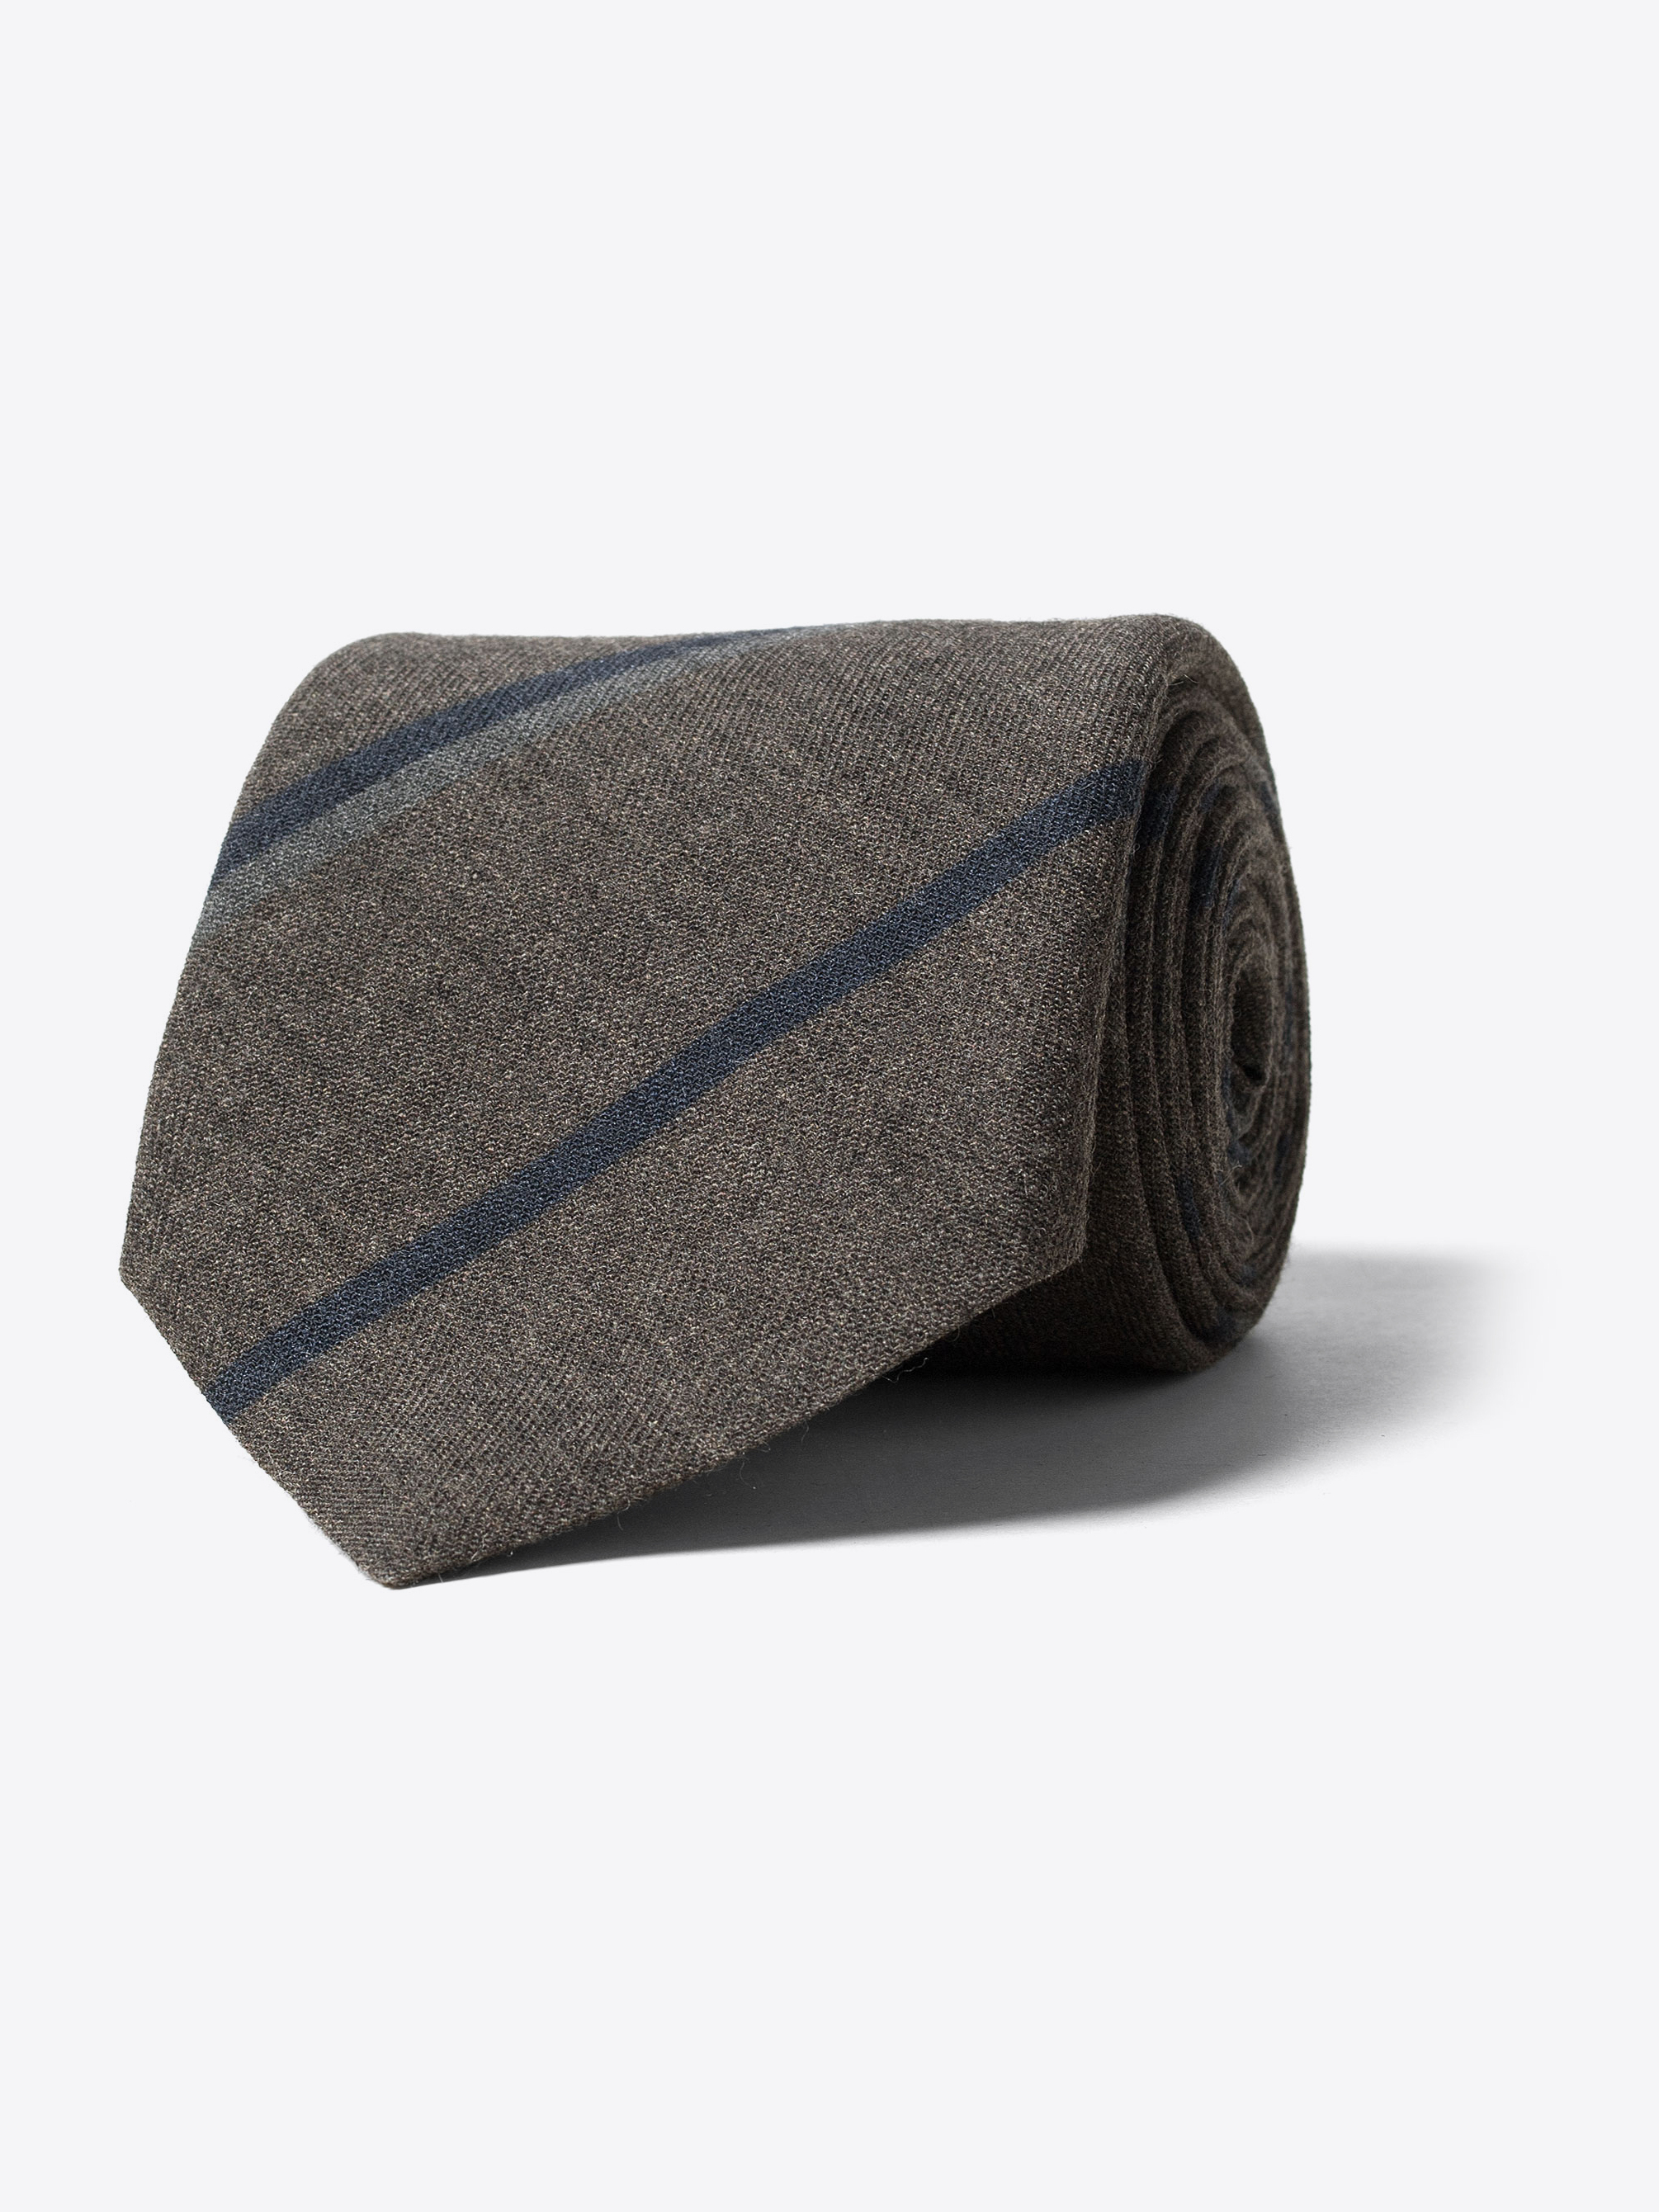 Zoom Image of Taupe and Navy Striped Wool Tie